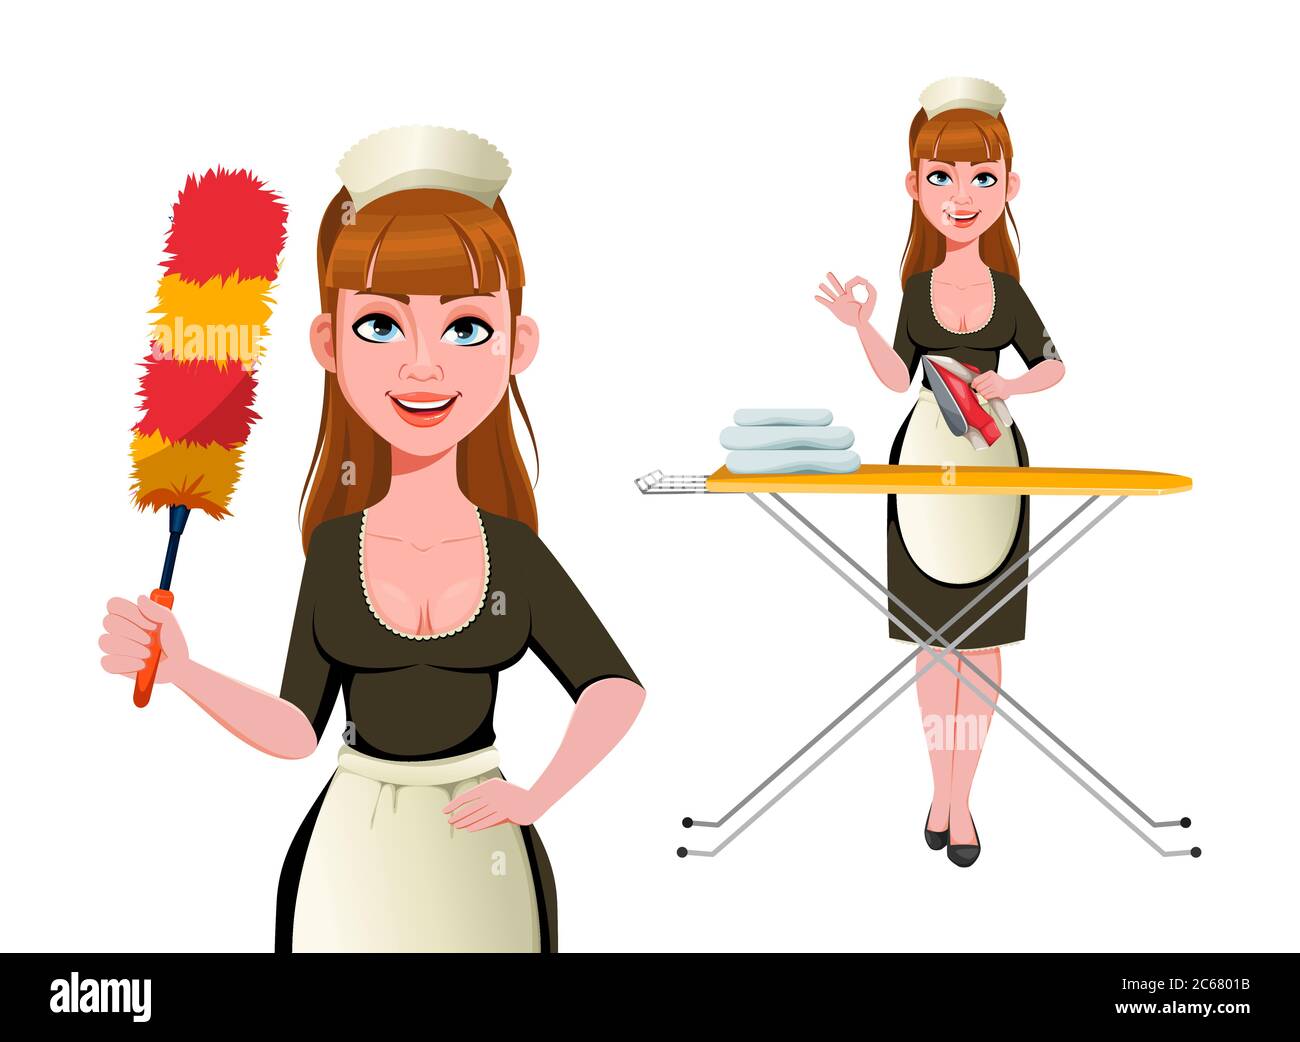 Maid, cleaning lady, smiling cleaning woman, set of two poses. Cheerful housemaid cartoon character. Vector illustration Stock Vector